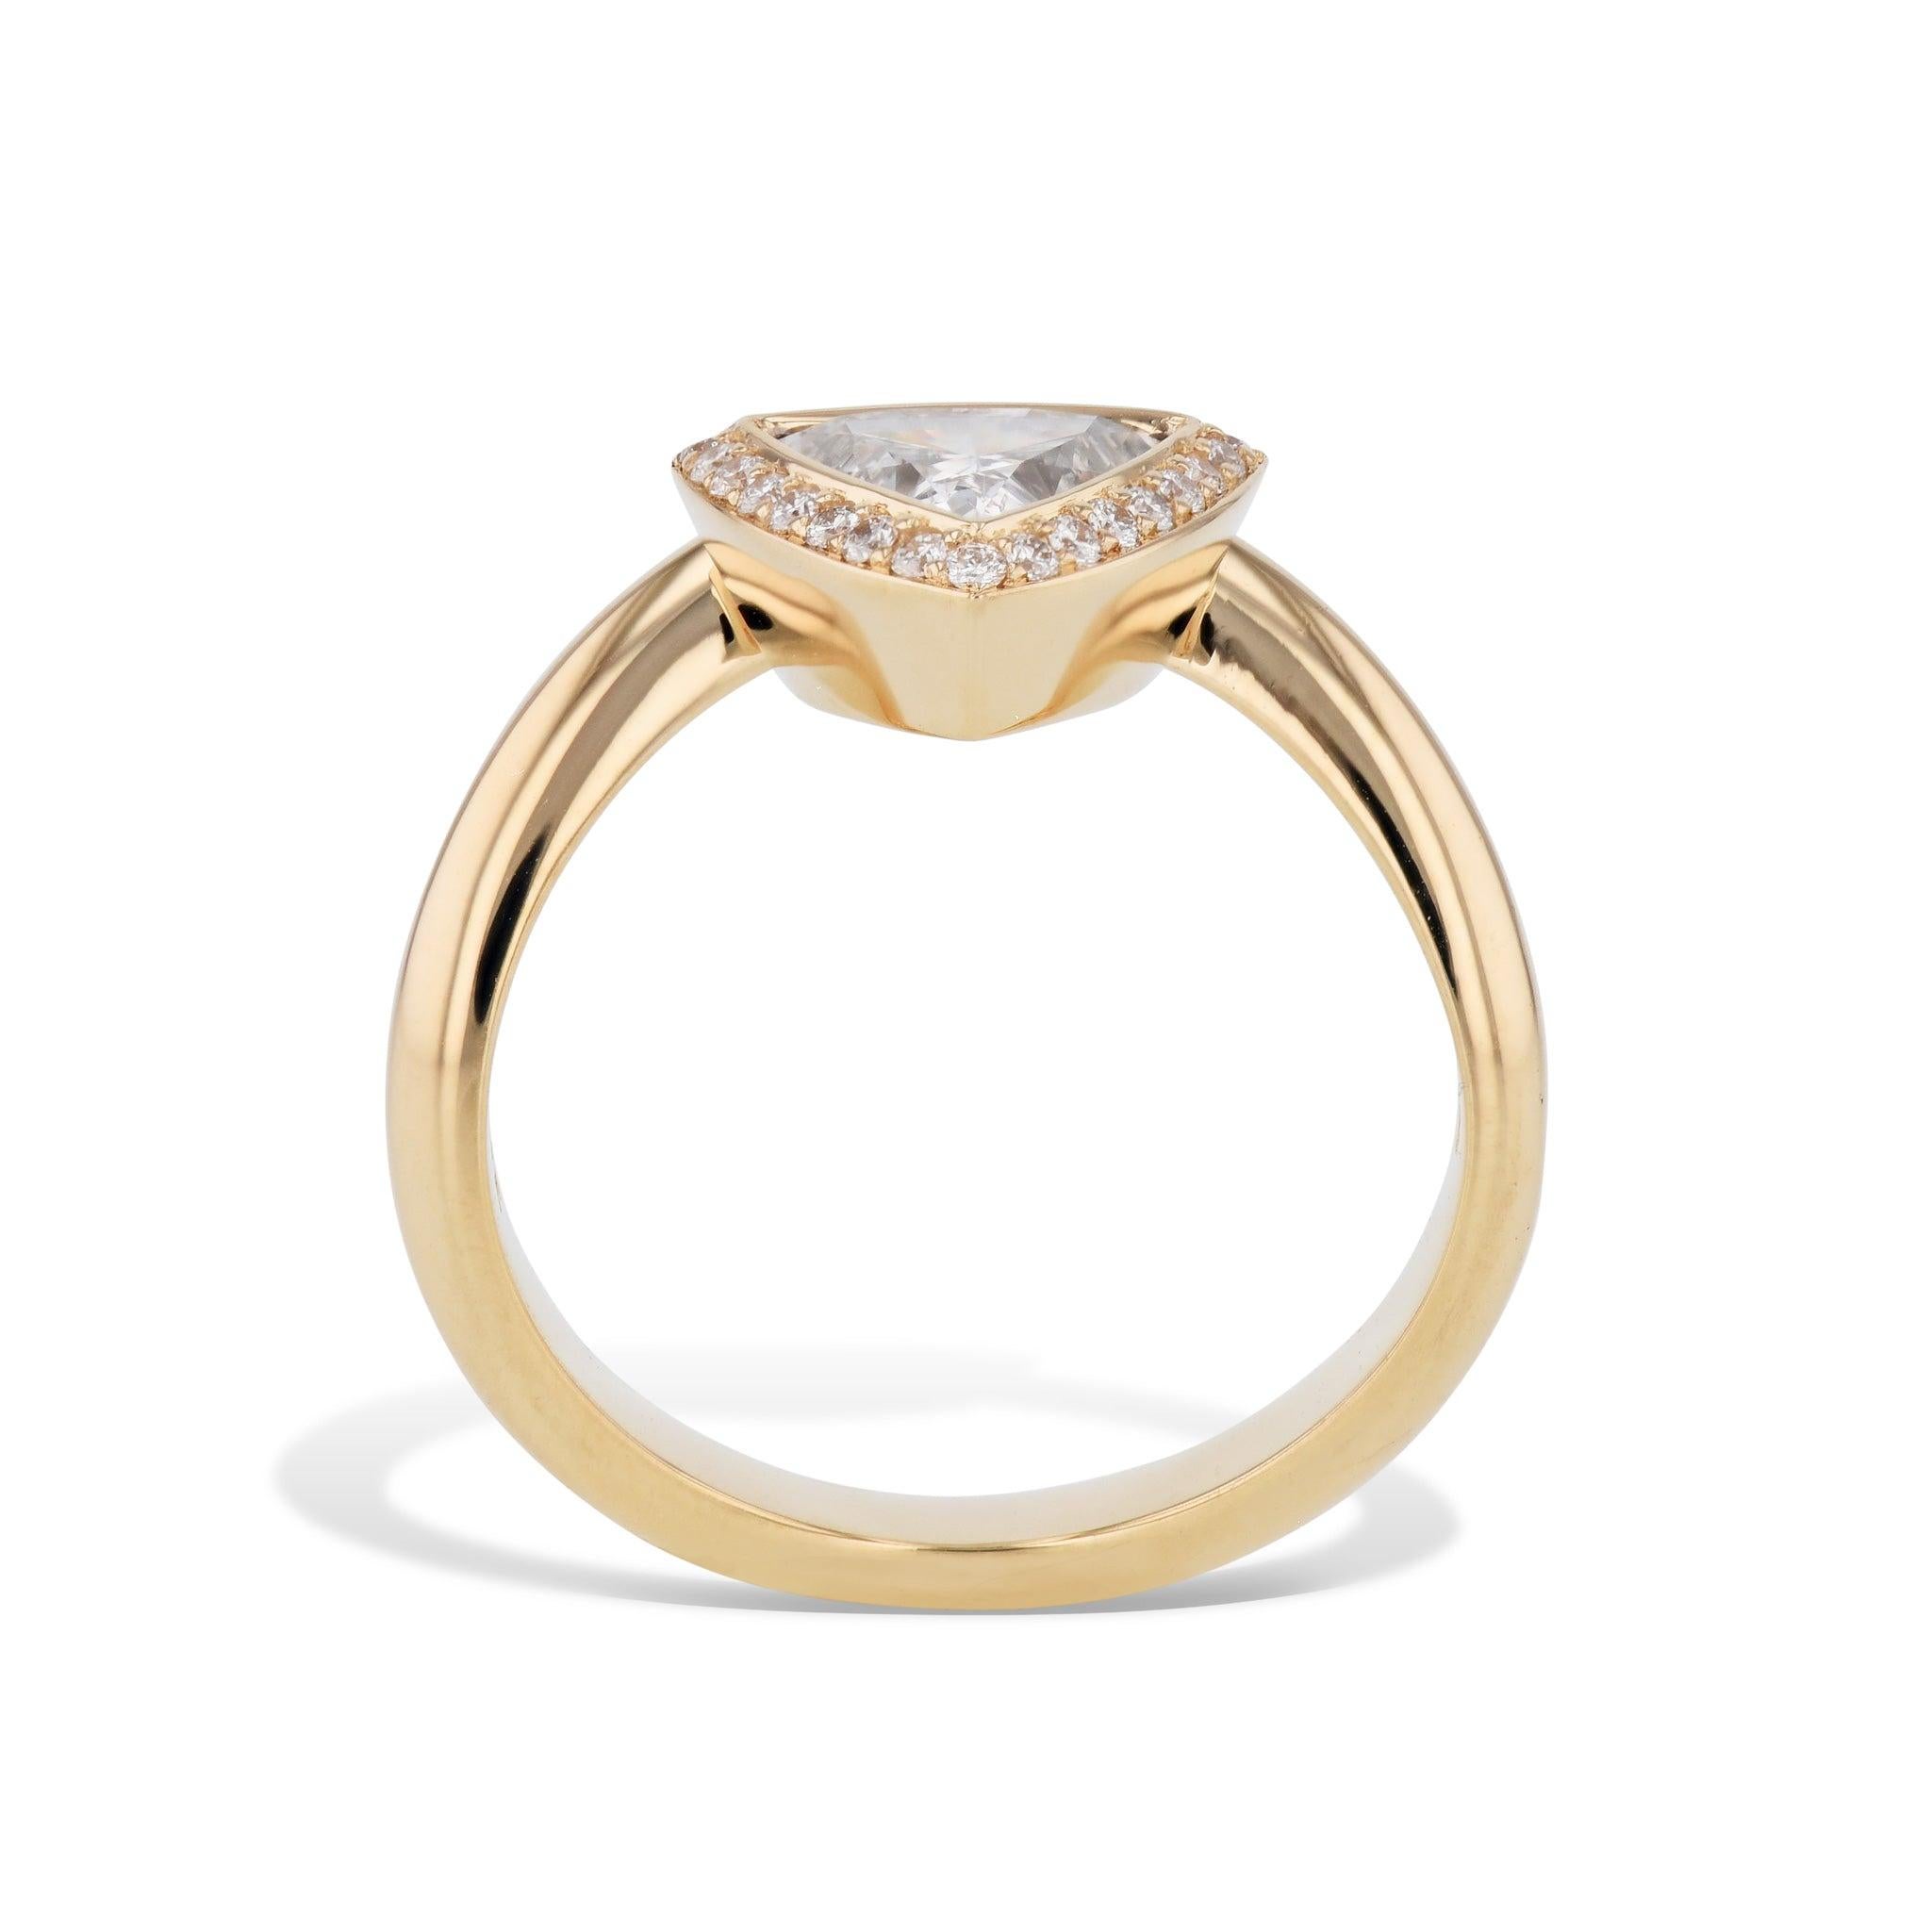 Capture her heart and imagination with a stunning, handmade Trillion Diamond Rose Gold Engagement Ring. This 18kt. beauty features a Trillion Cut center diamond, surrounded by pave diamonds. Make a bold statement and declare your love with this ring